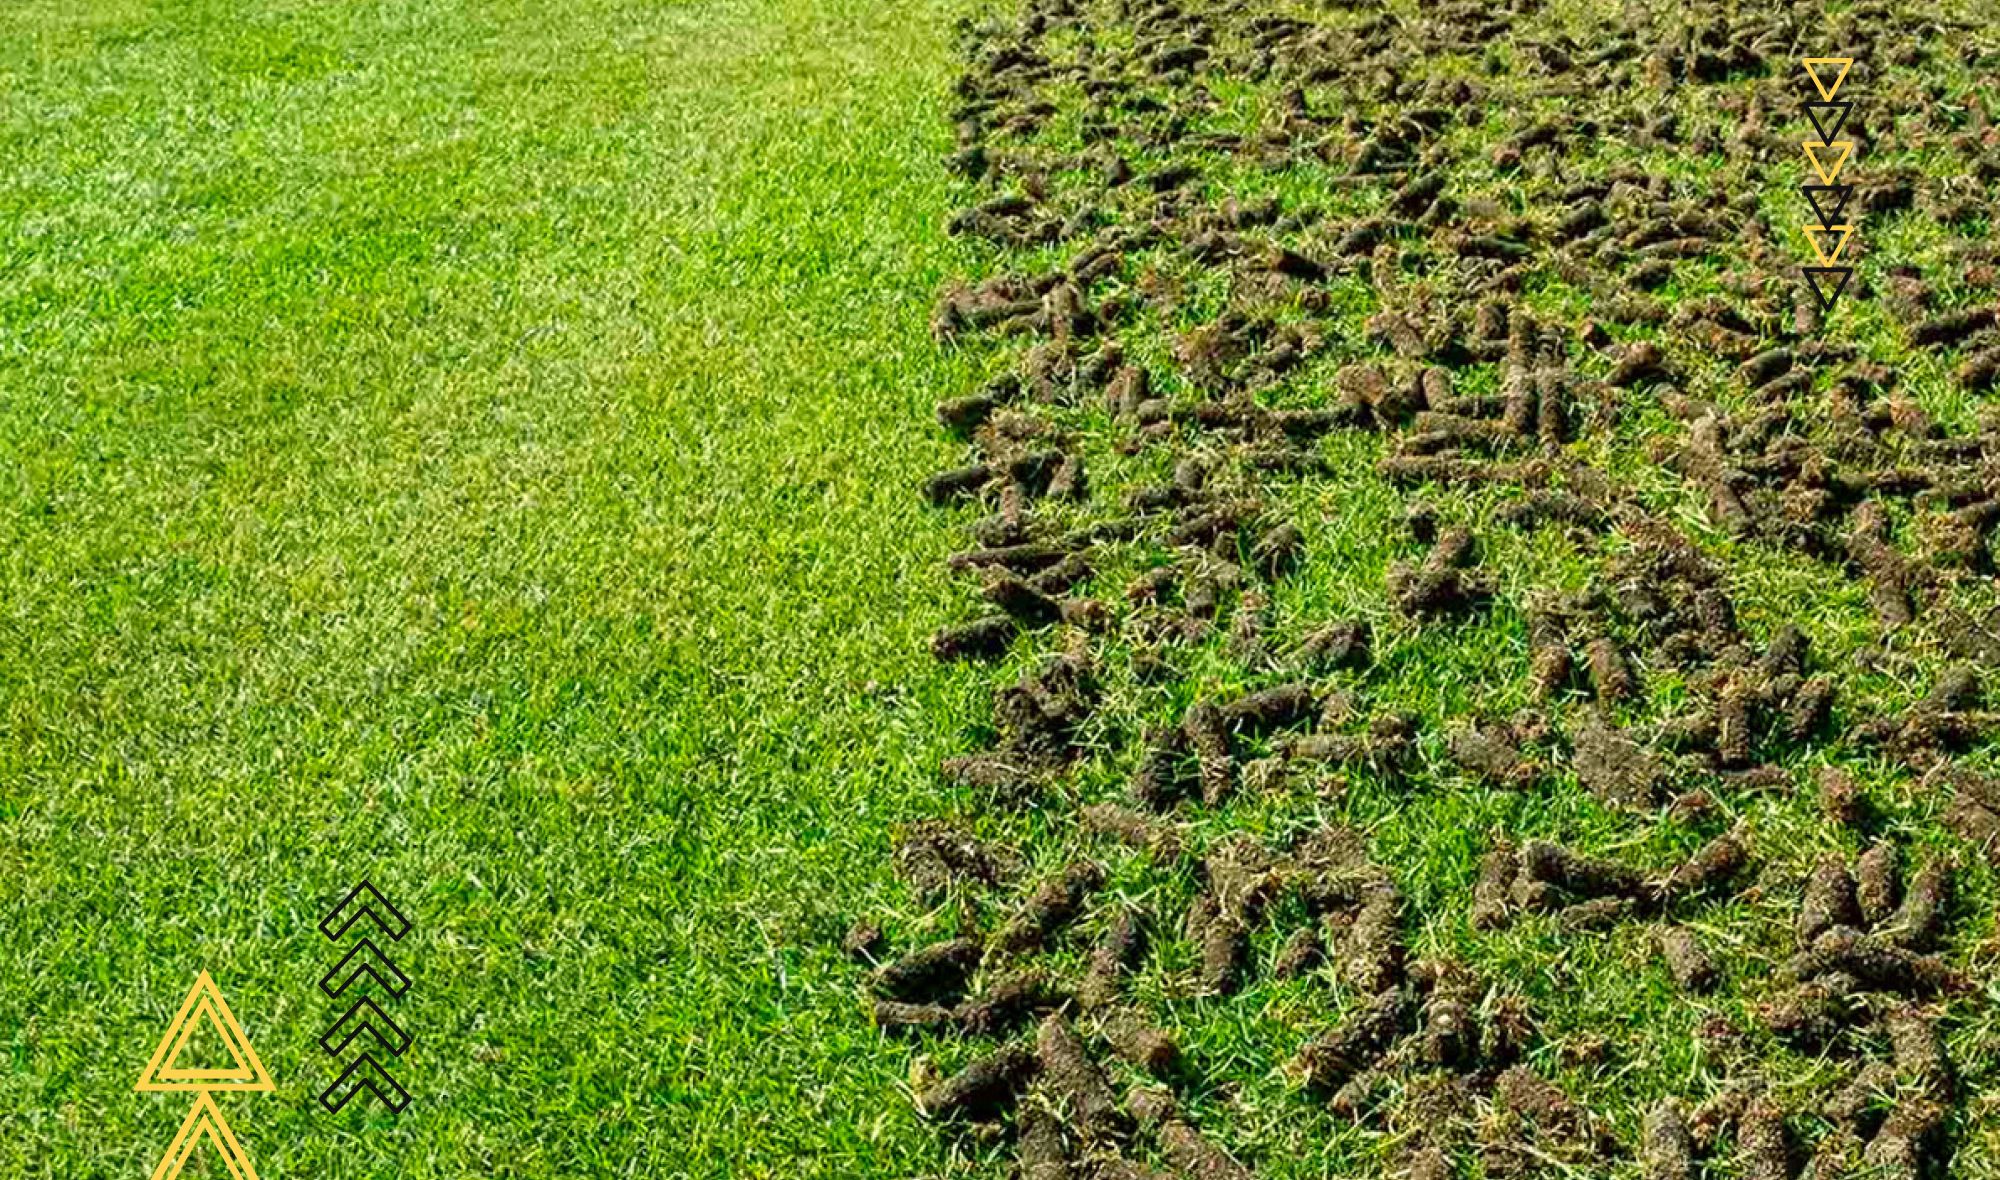 When Should I Aerate My Lawn? Expert Tips and Guidelines